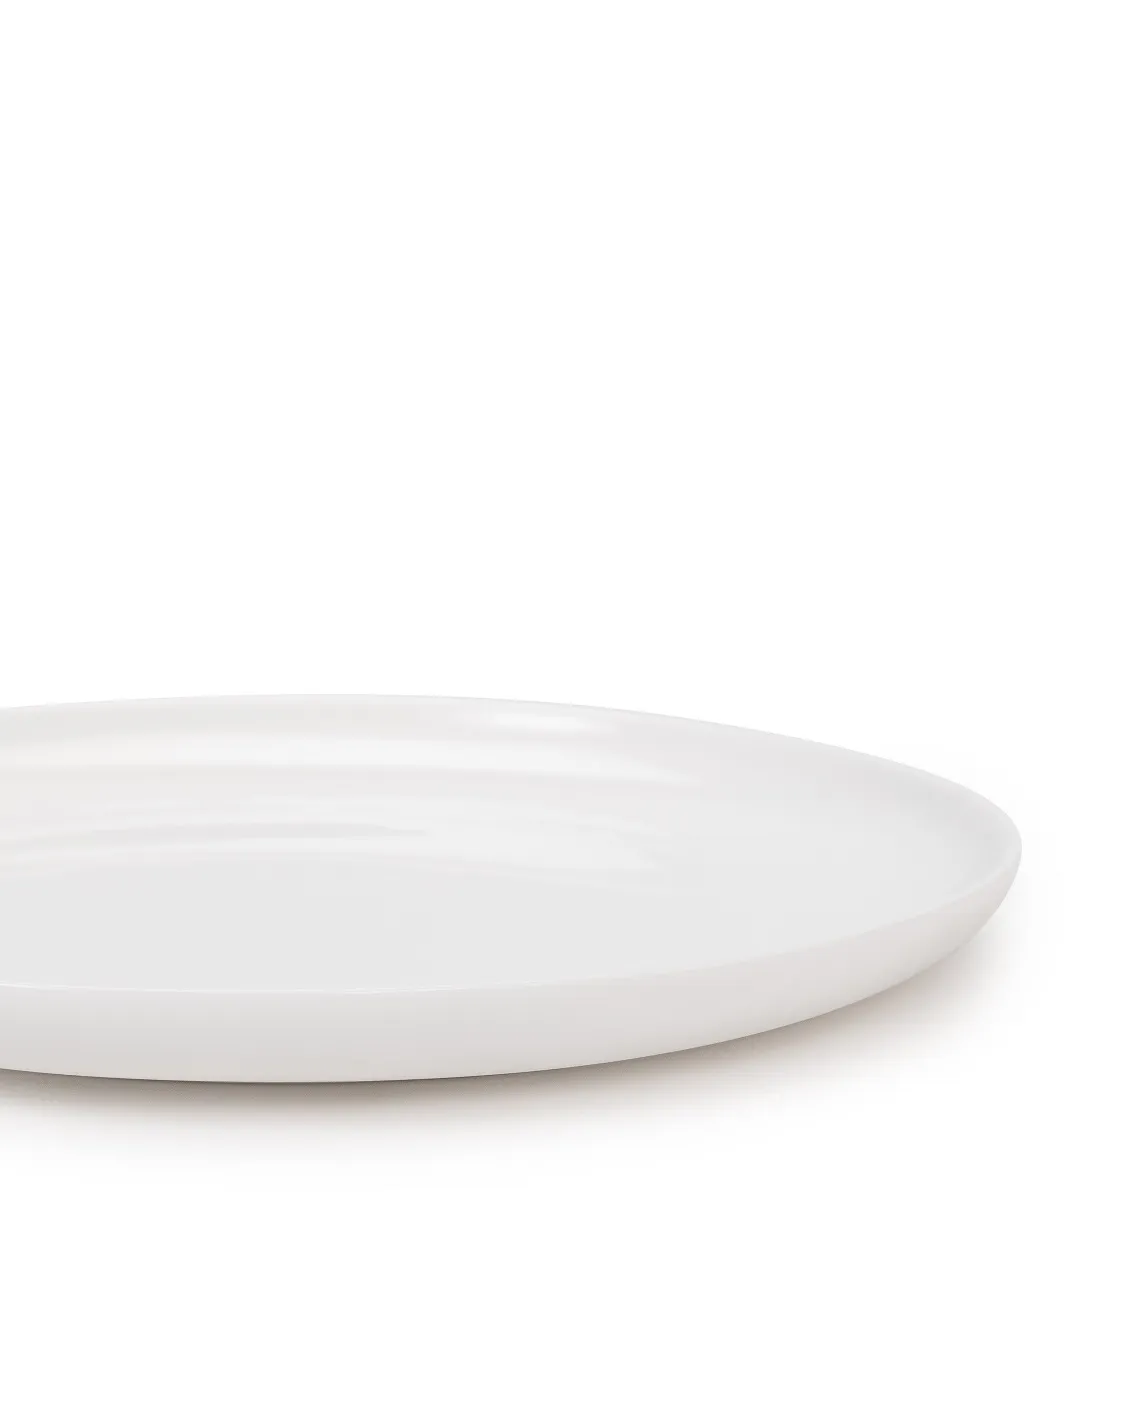 Low Plate S White Base Collection Serax L 16 D 16 H 1.5 CM